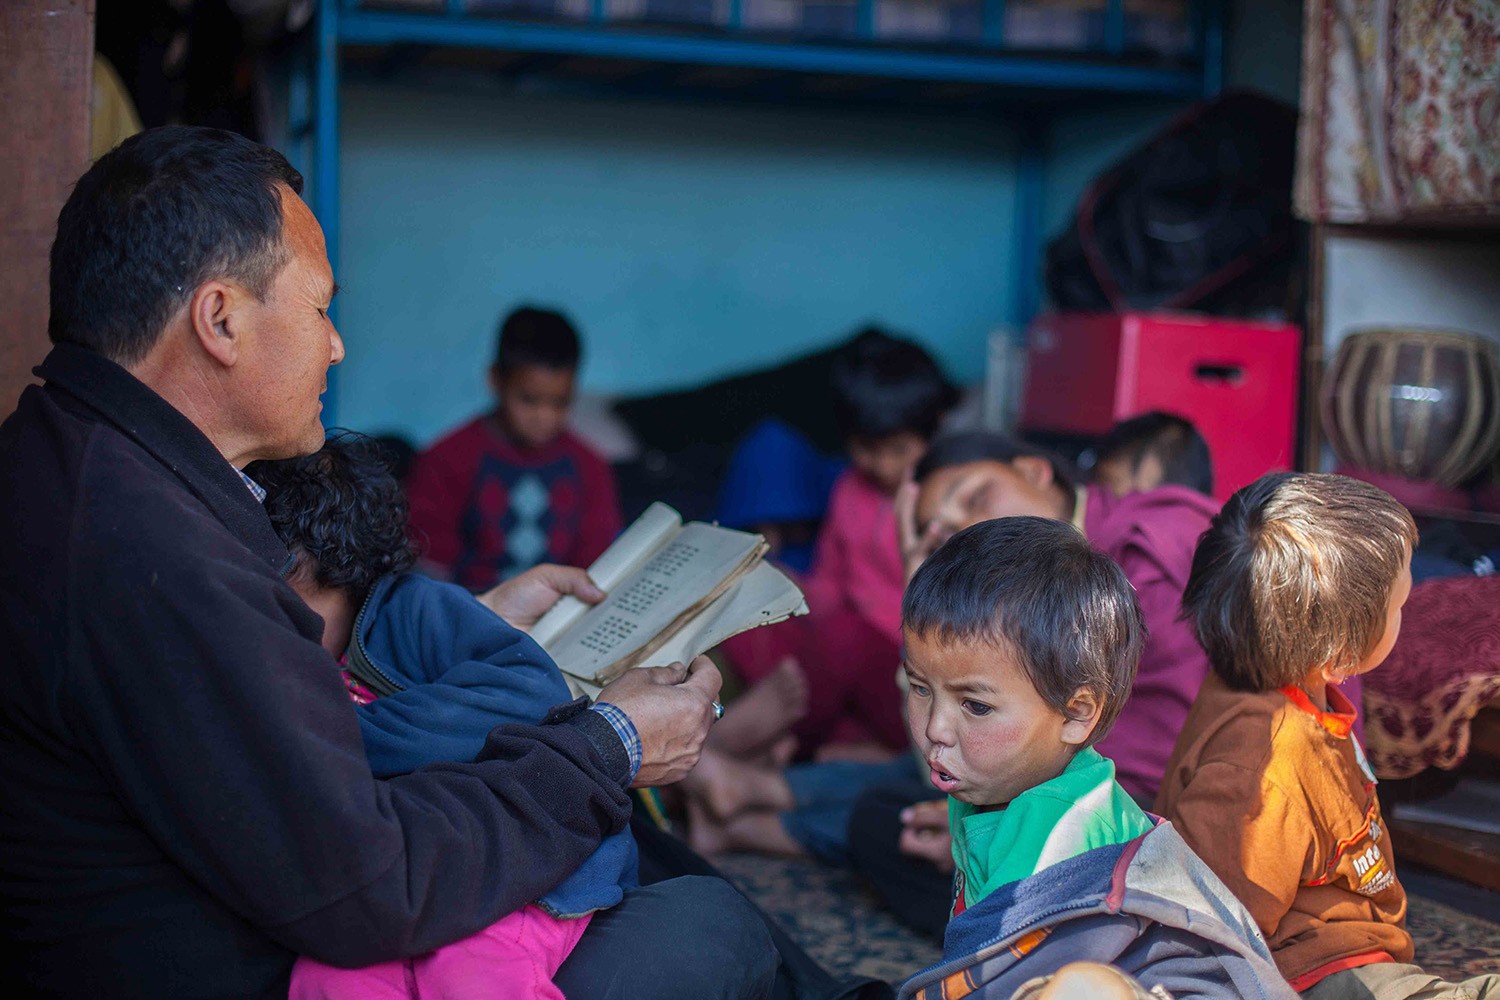 Running the school is a busy job, but Dayaram finds time to read to the children